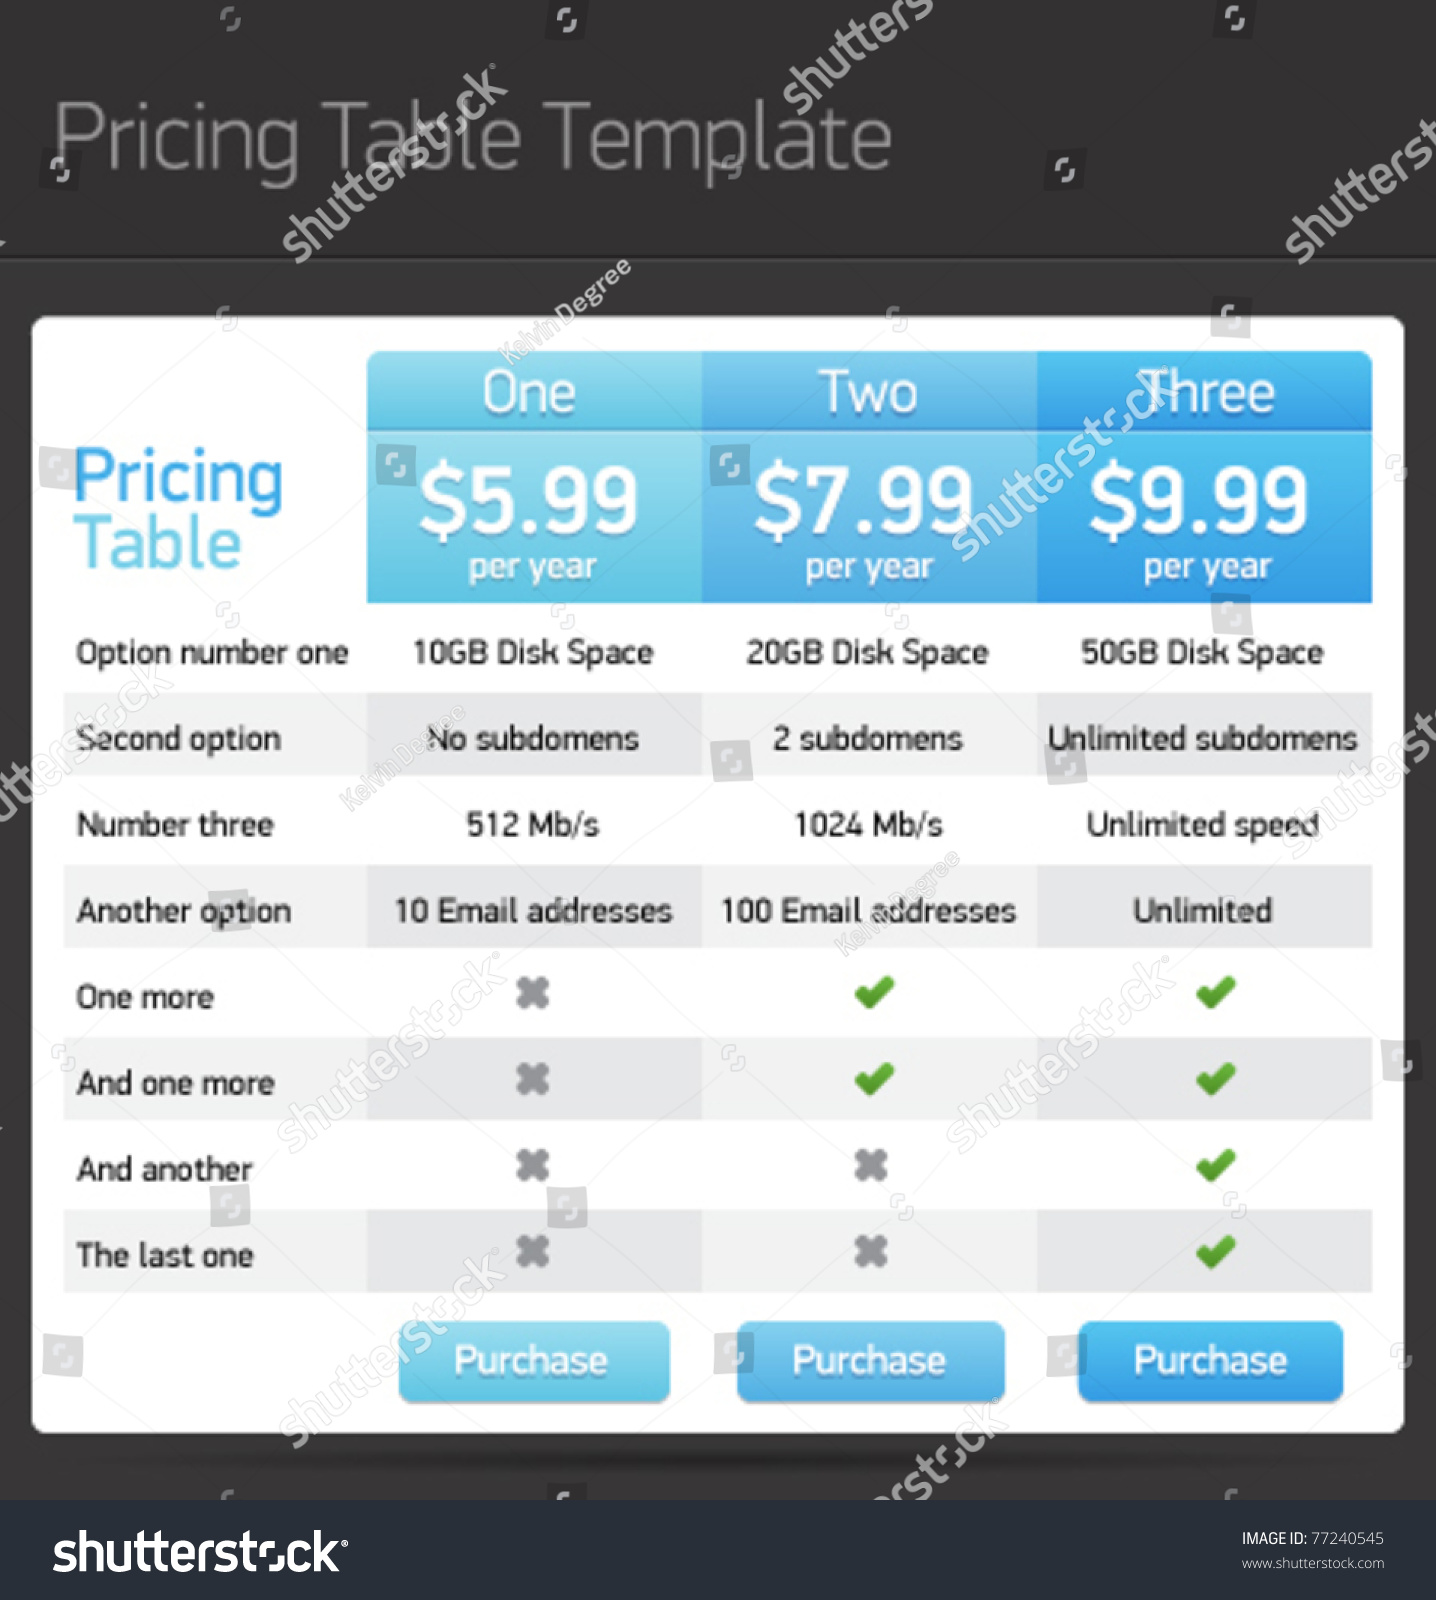 Vector Pricing Table Template 77240545 : Shutterstock